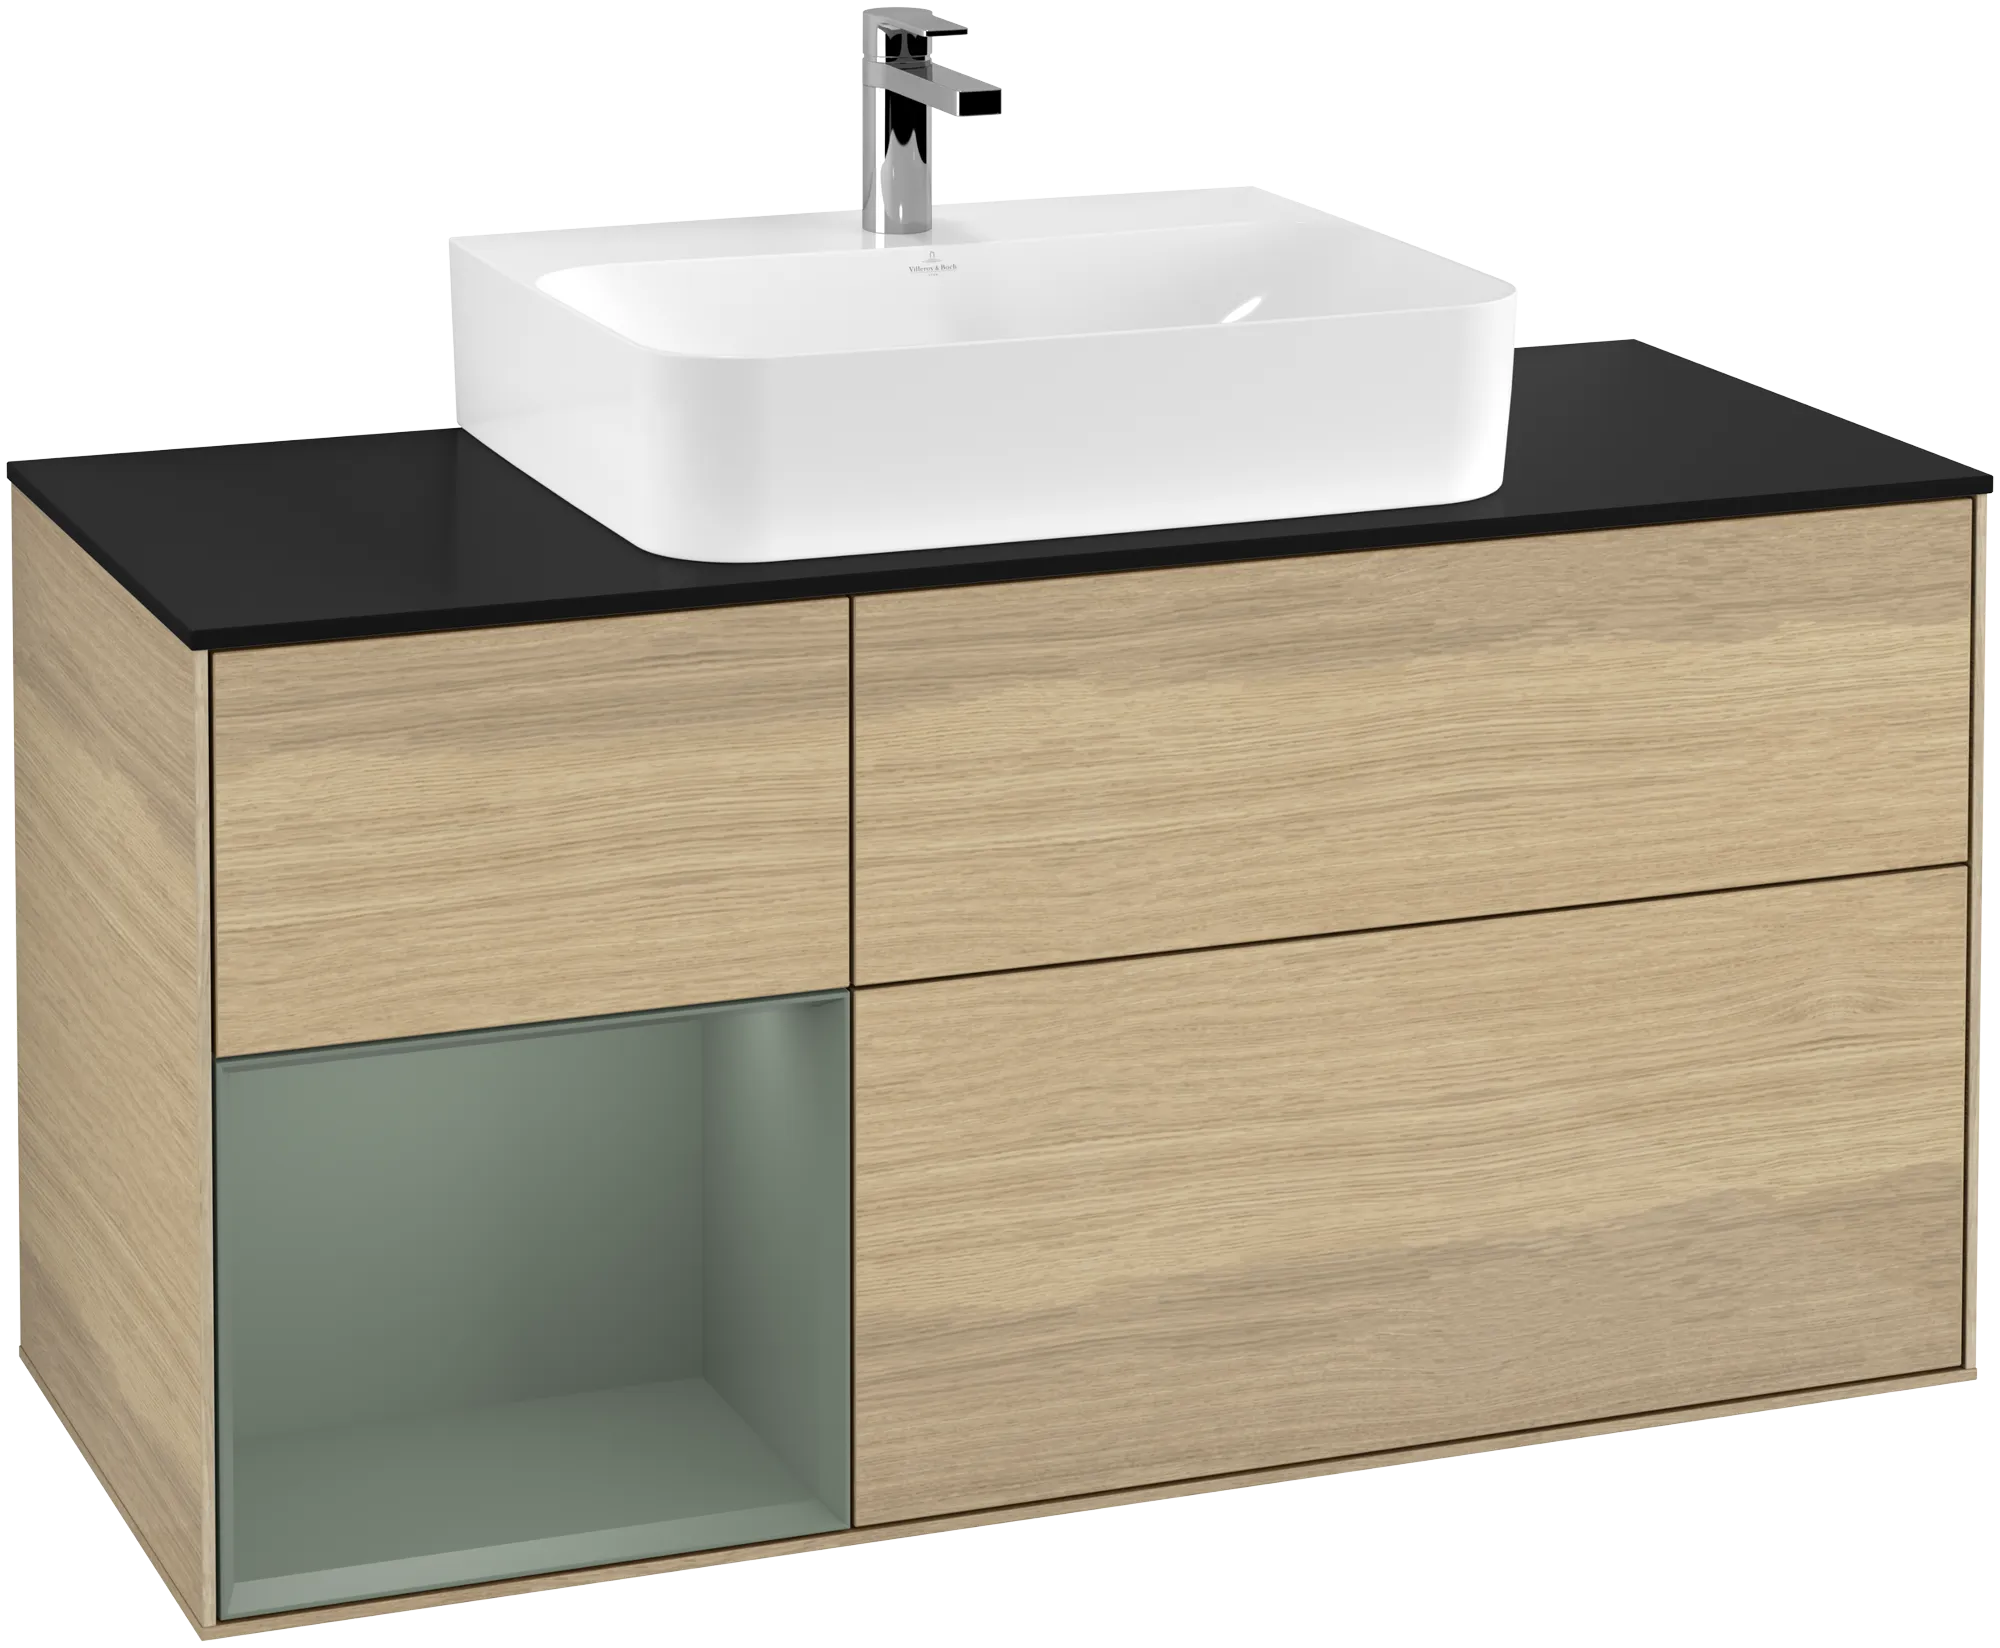 Picture of VILLEROY BOCH Finion Vanity unit, with lighting, 3 pull-out compartments, 1200 x 603 x 501 mm, Oak Veneer / Olive Matt Lacquer / Glass Black Matt #G162GMPC